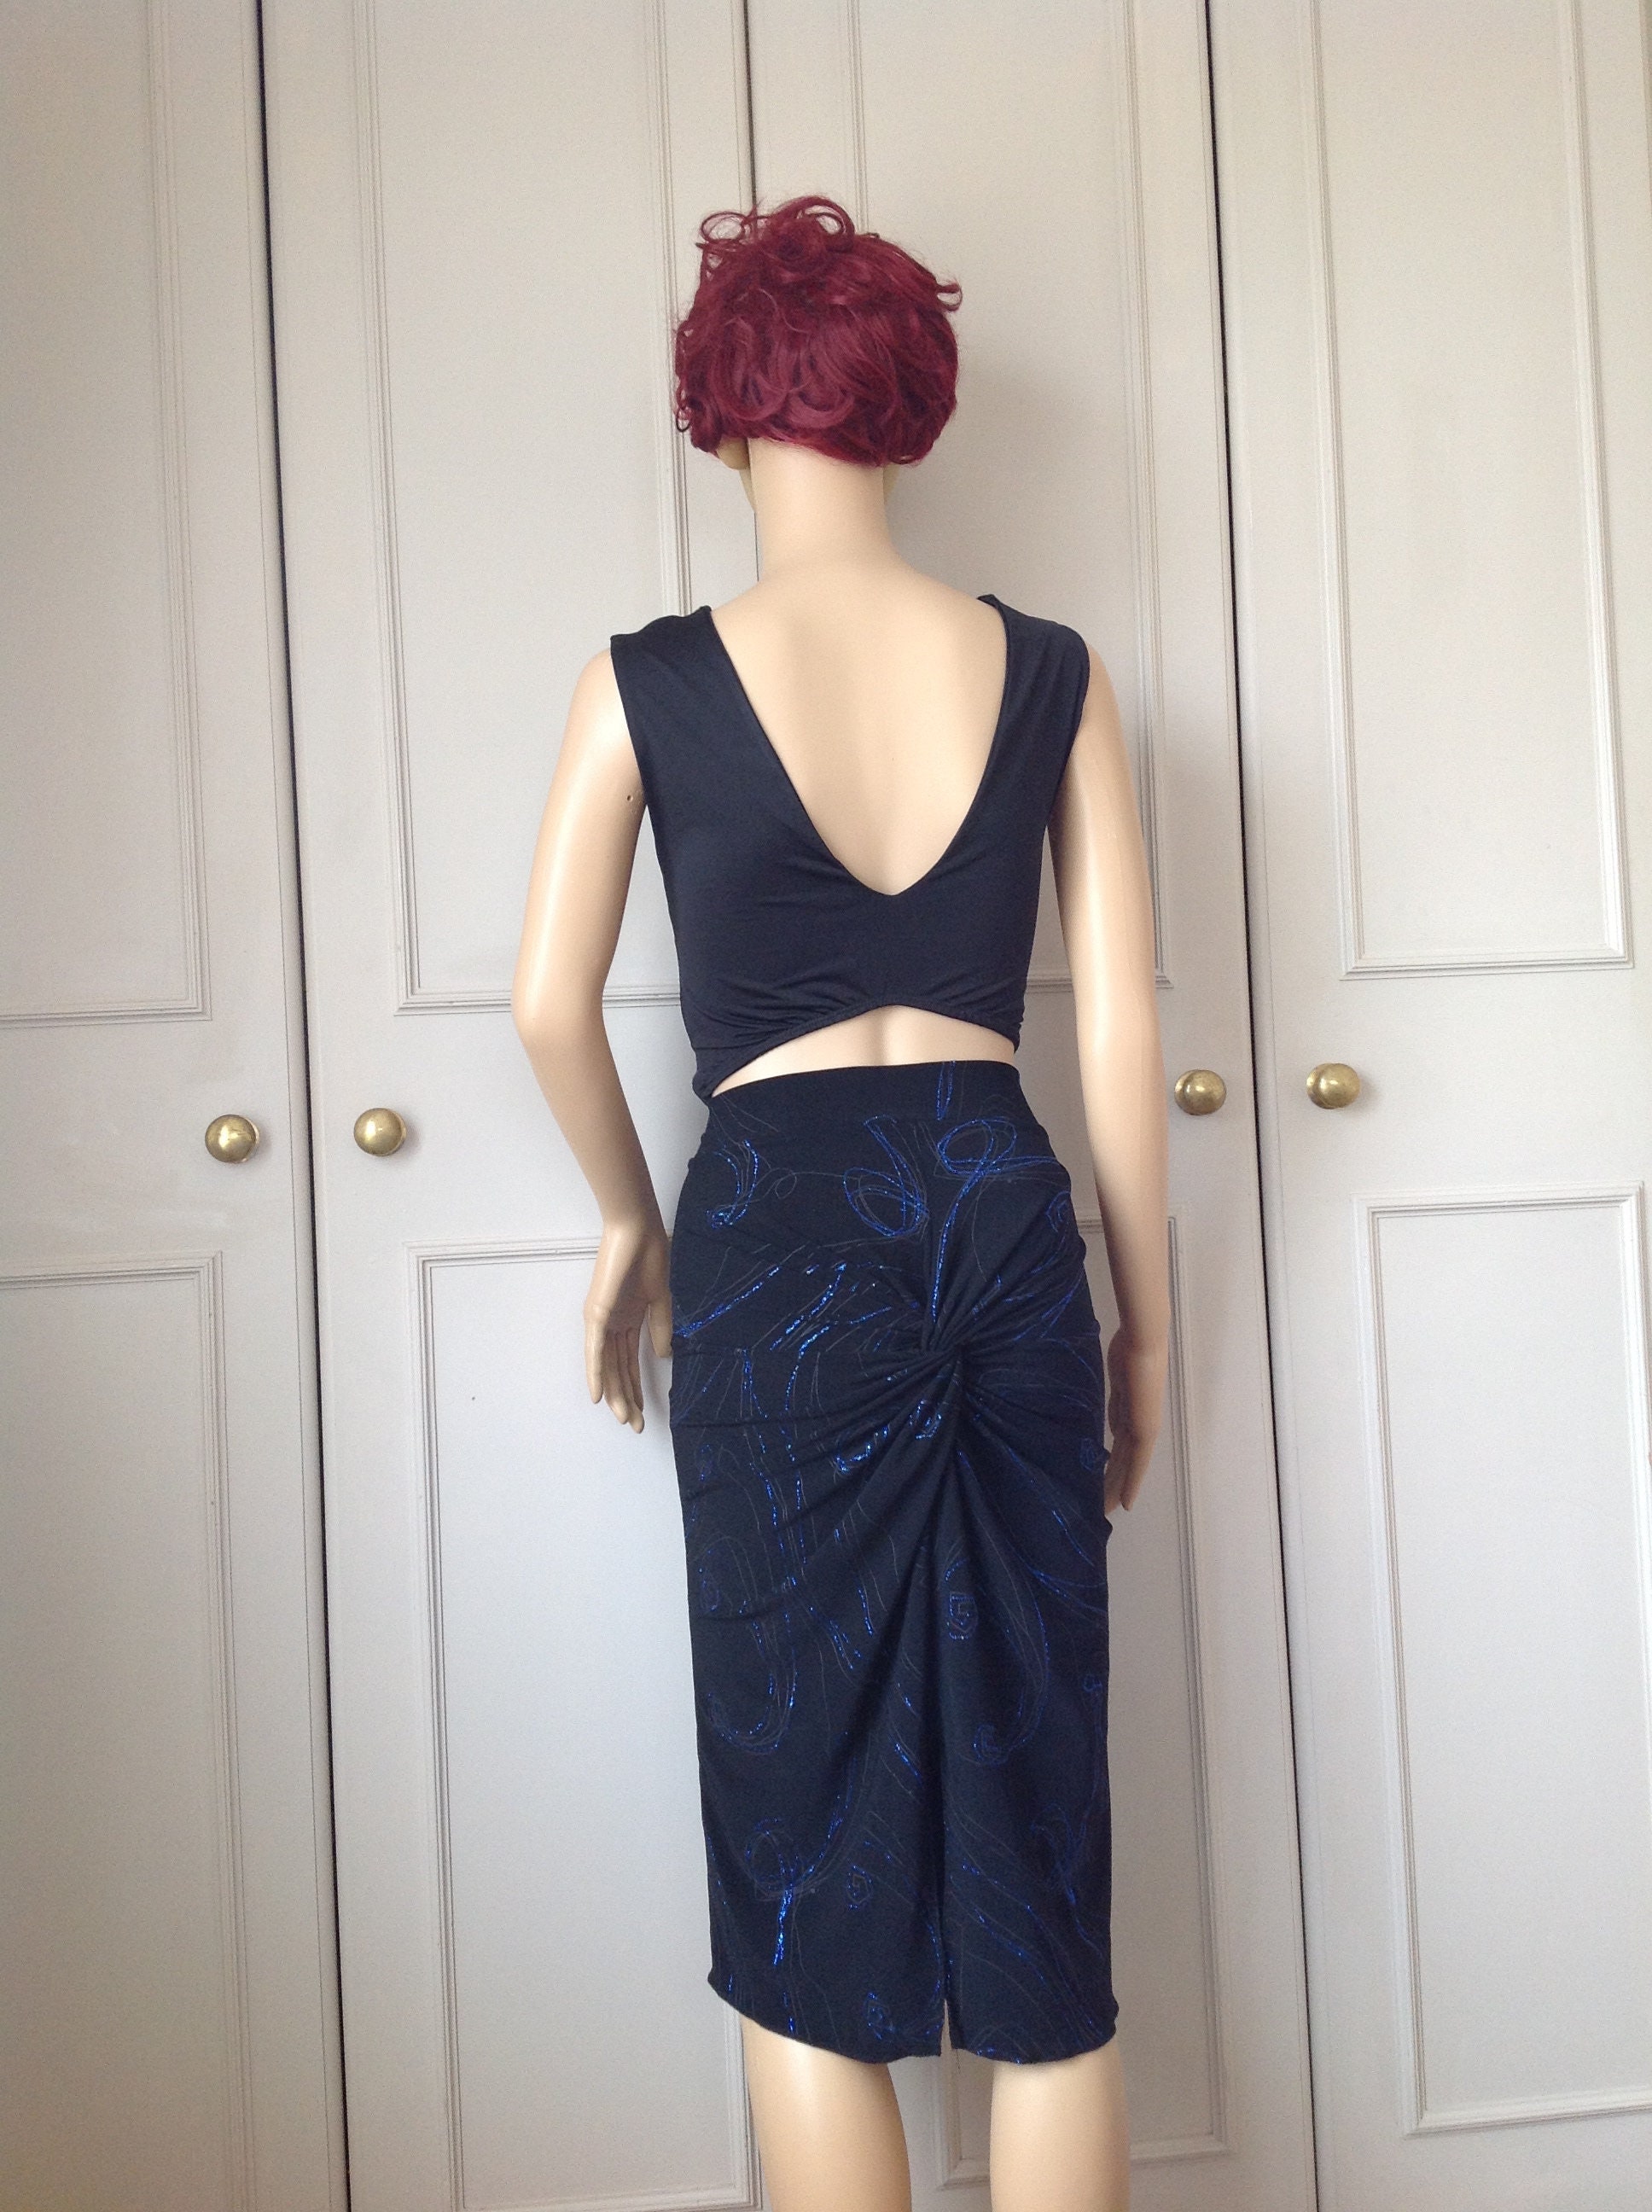 Tango Skirt in Small and Large Sizes - Etsy